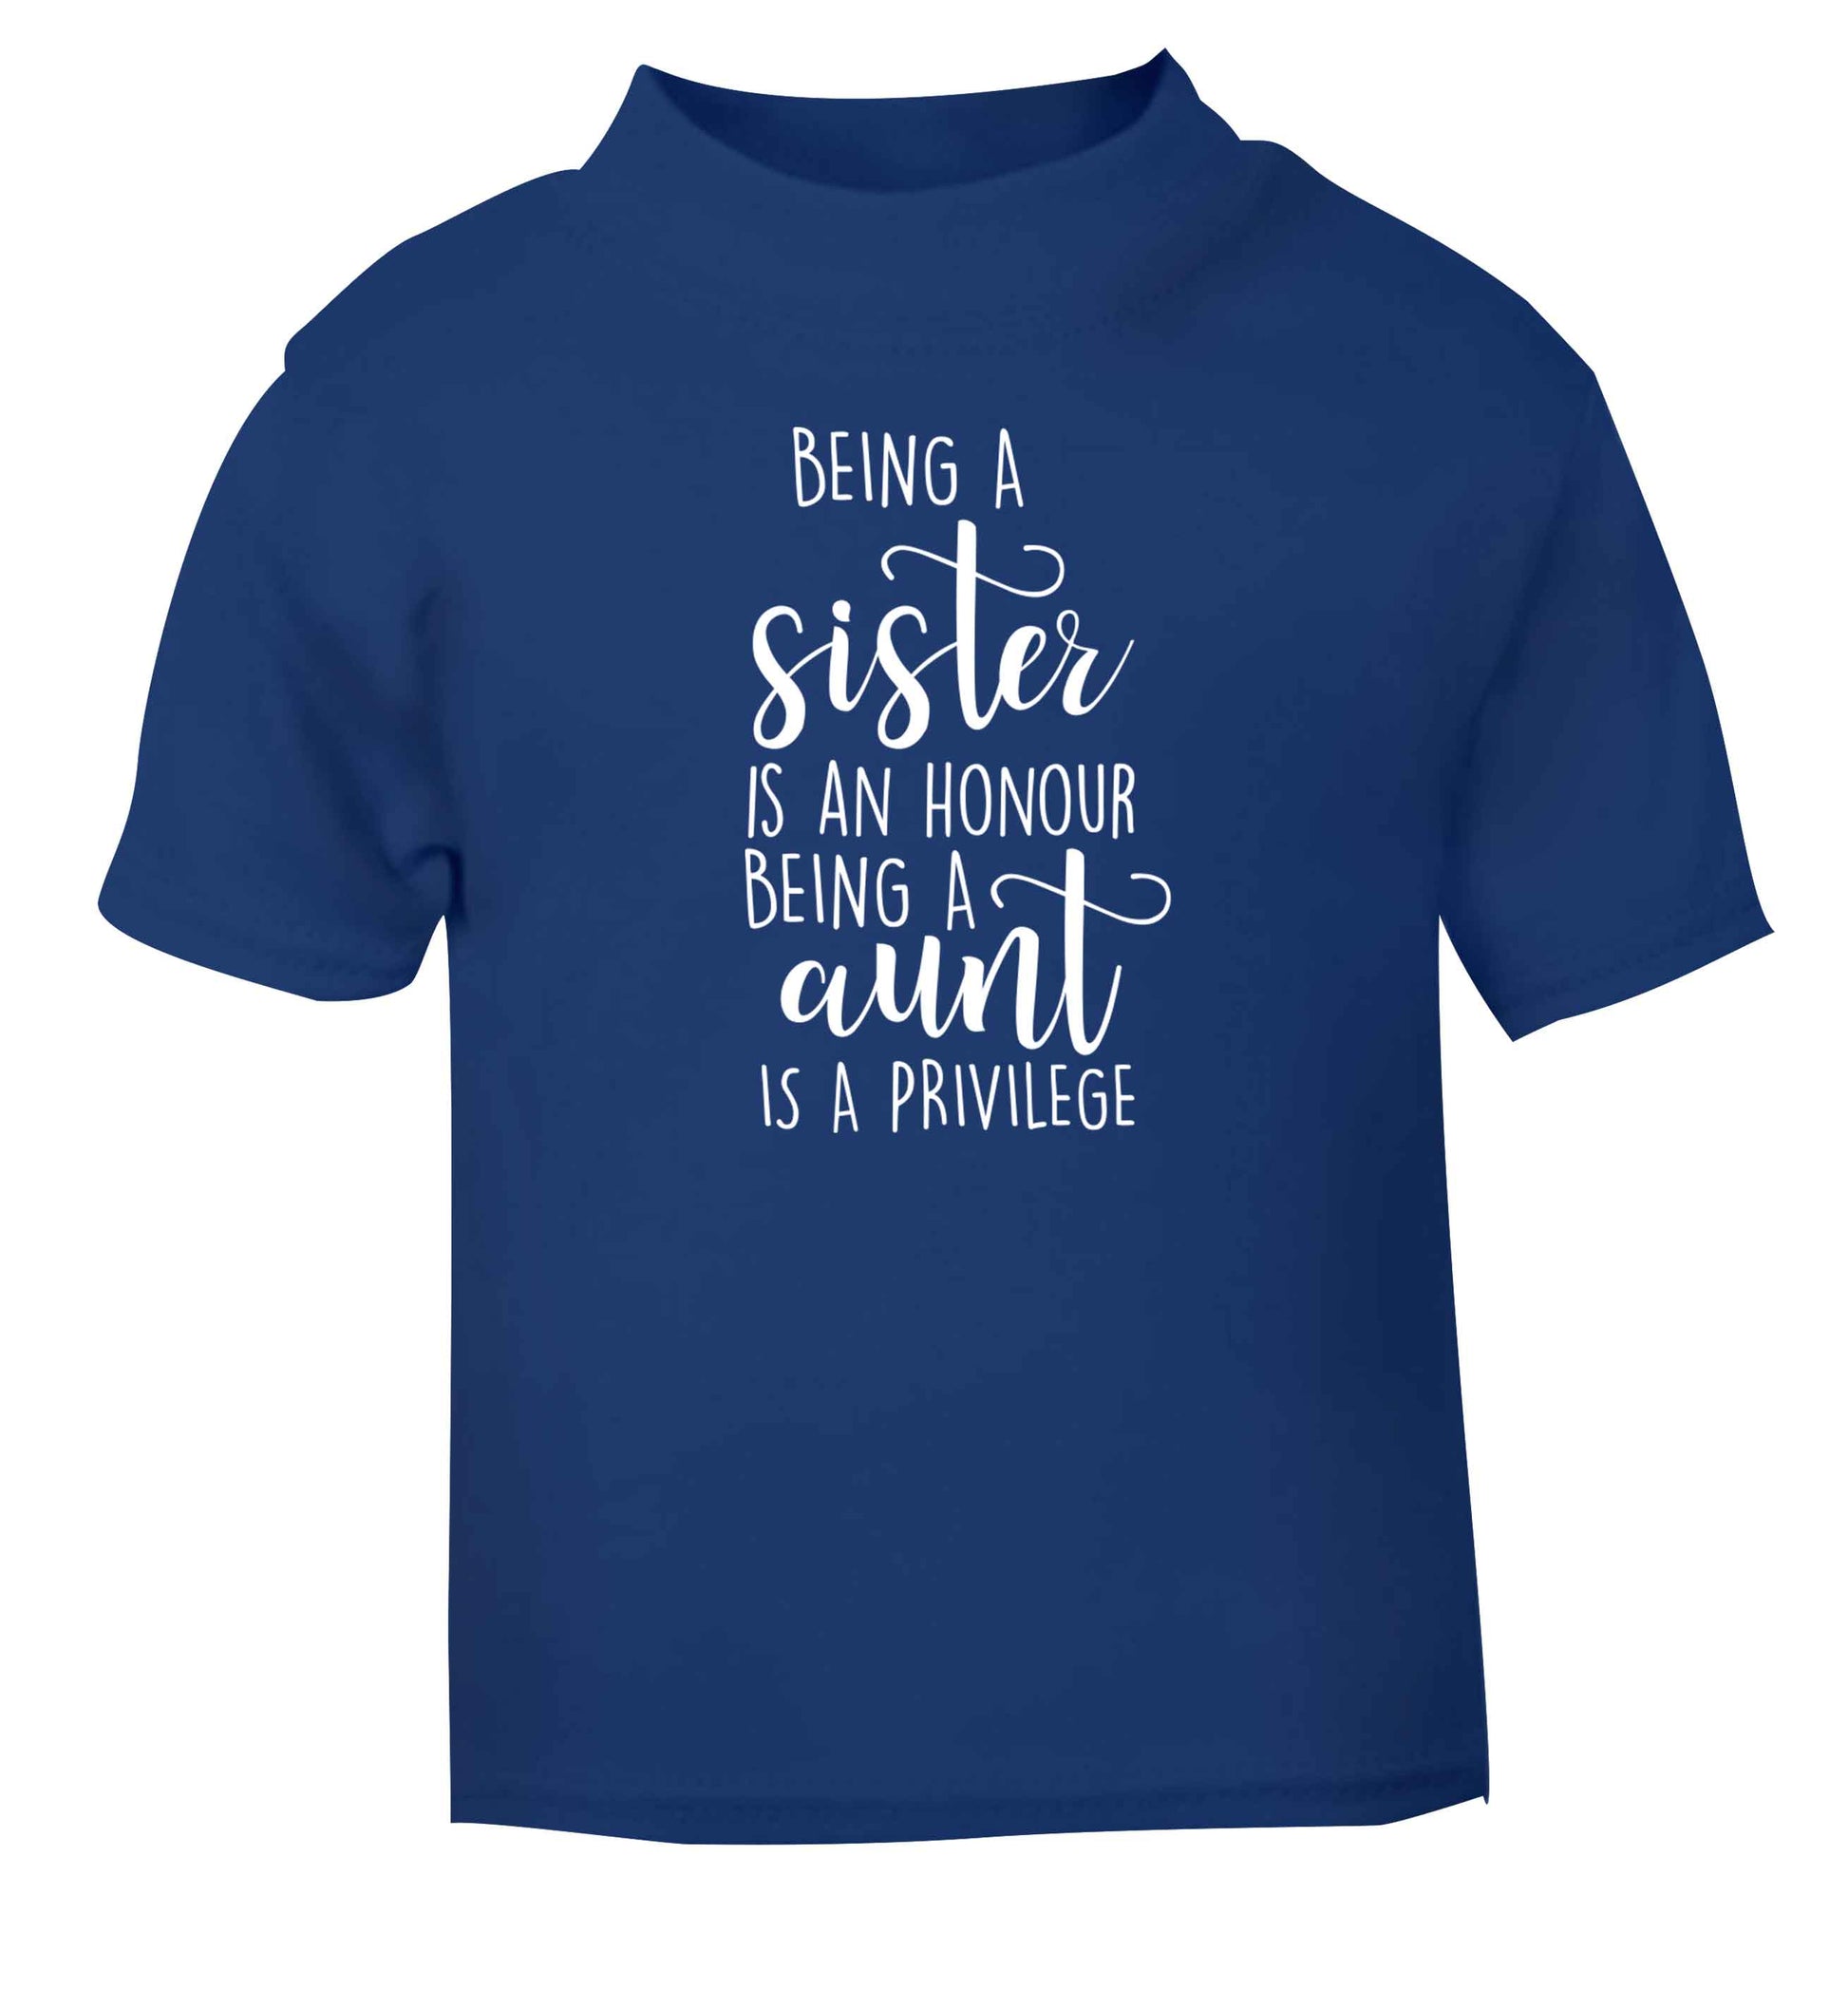 Being a sister is an honour being an auntie is a privilege blue Baby Toddler Tshirt 2 Years